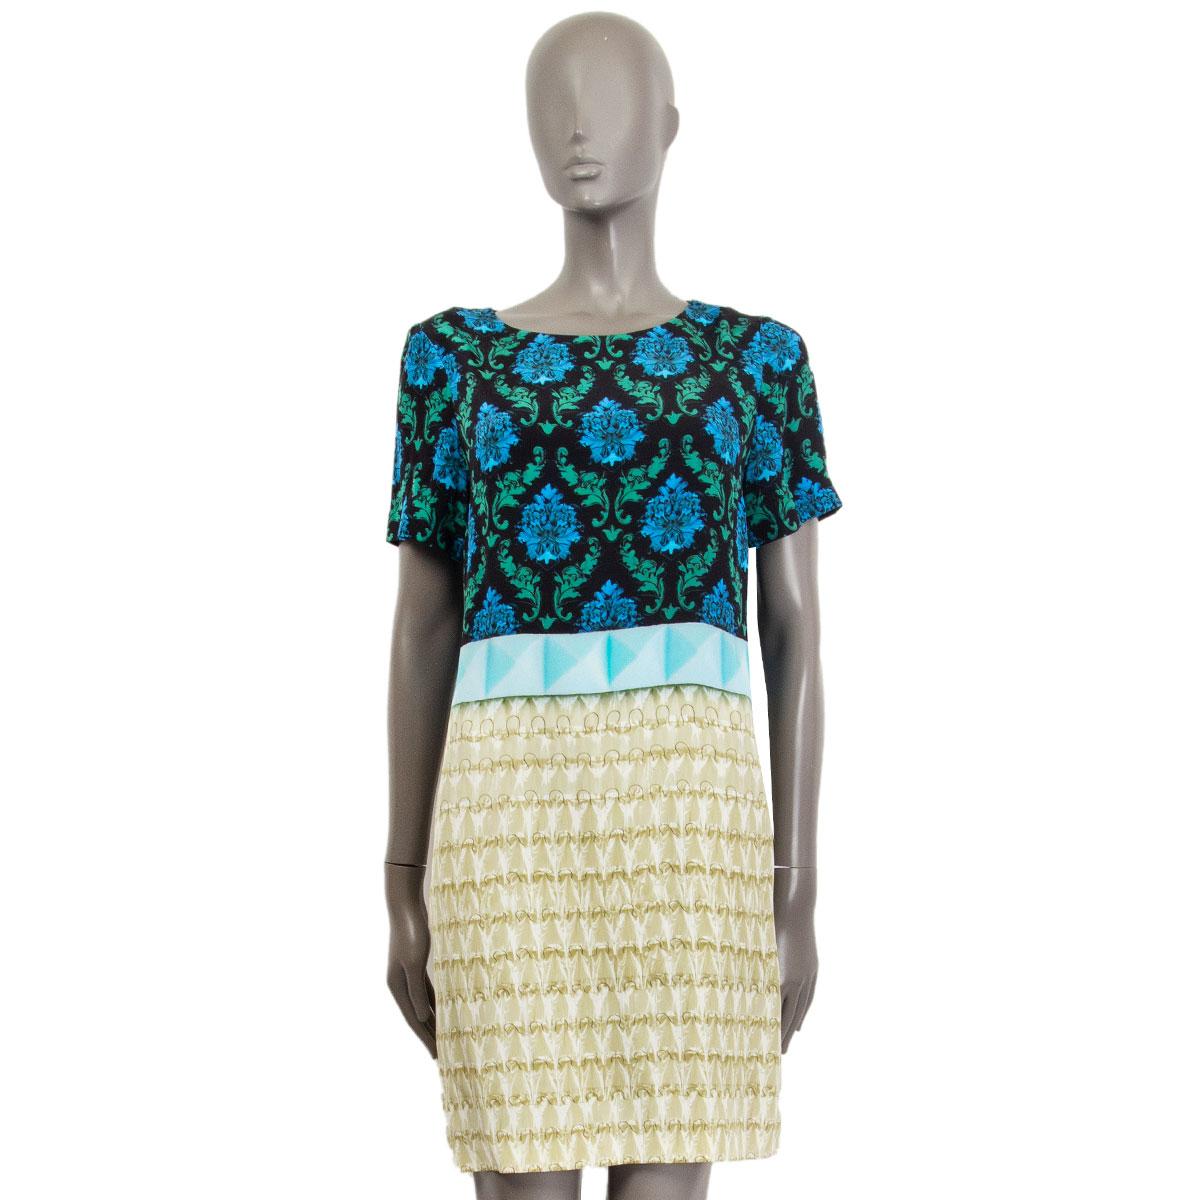 100% authentic Mary Katrantzou short-sleeve tunic dress in black, blue, jade, off-white, olive silk (100%). Unlined. Has been worn and is in excellent condition.

Tag Size	10
Size	M
Shoulder Width	40cm (15.6in)
Bust From	96cm (37.4in)
Waist